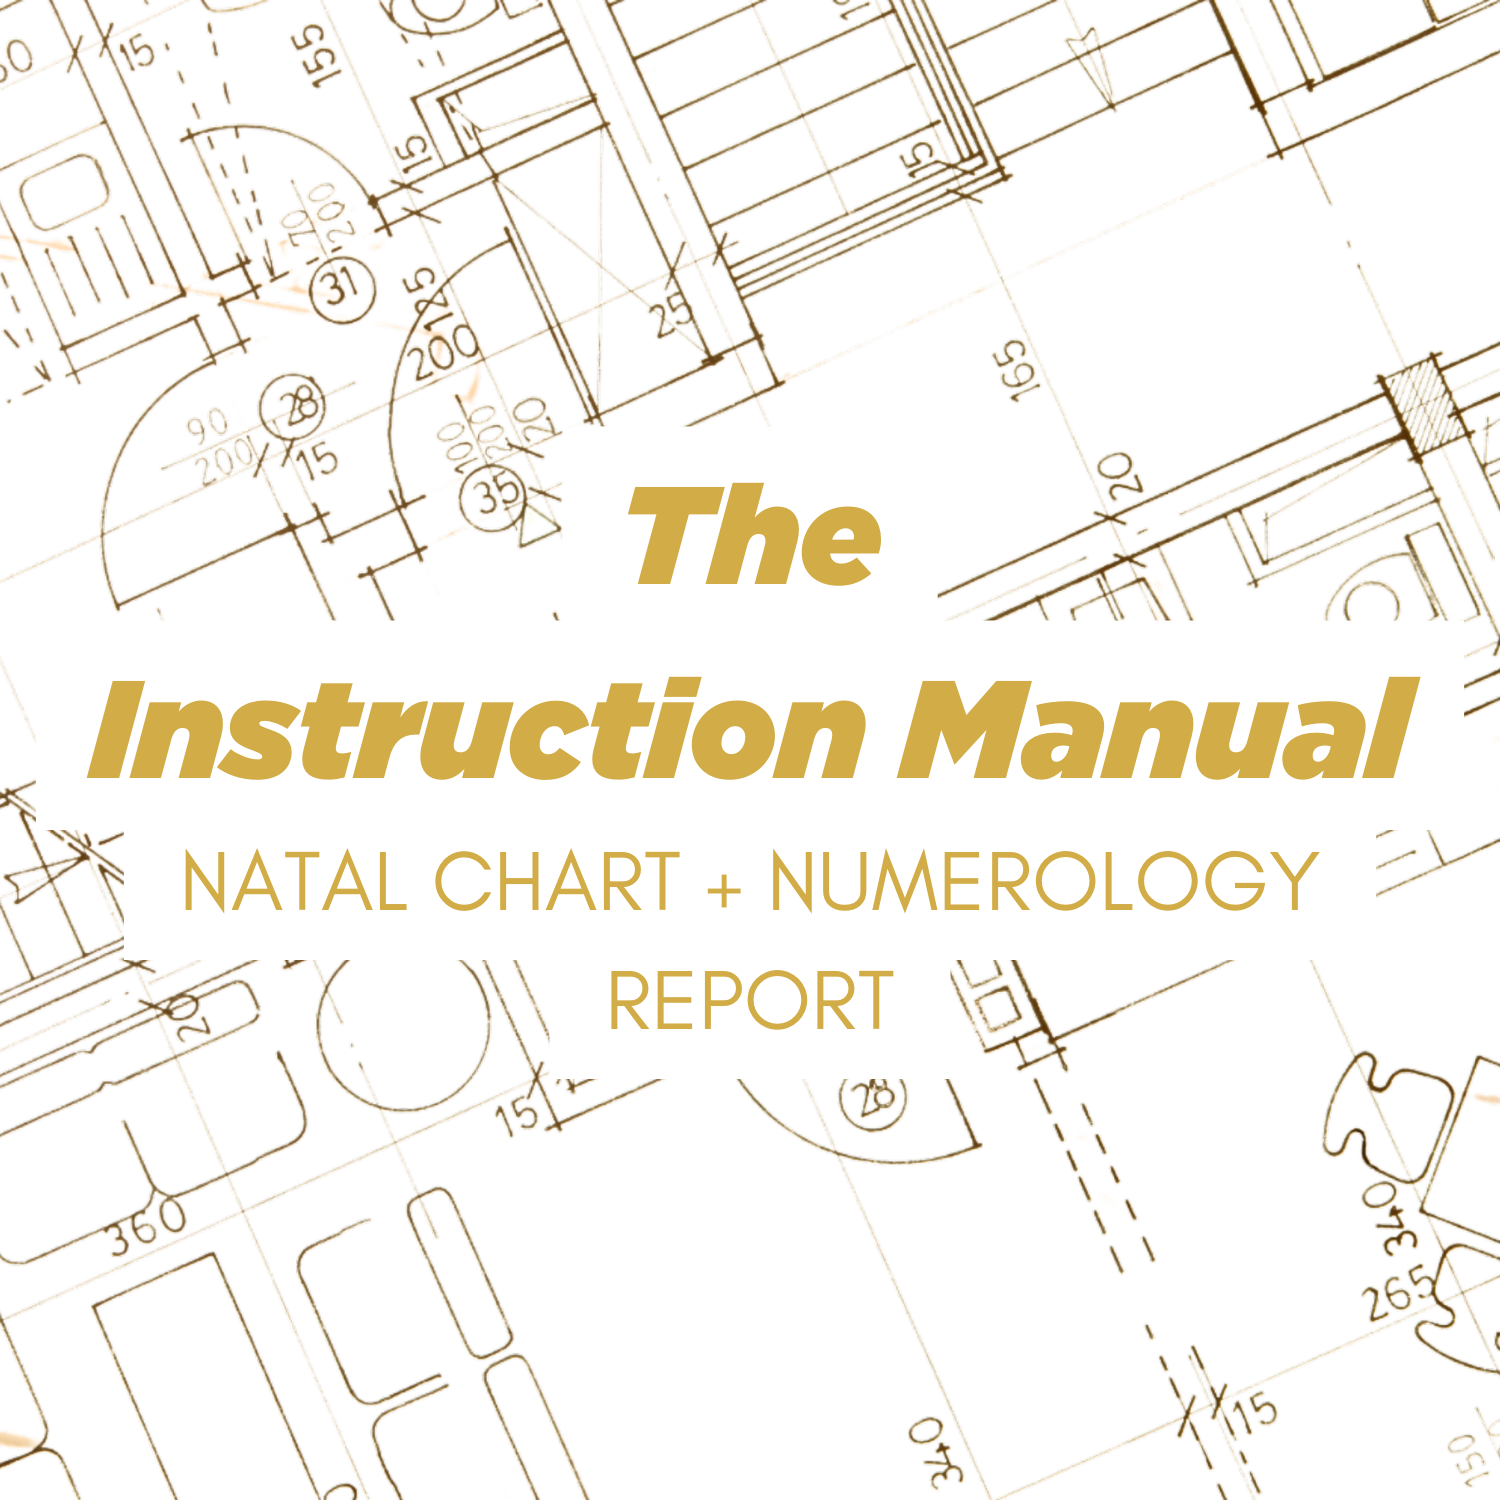 The Instruction Manual | Natal Chart + Numerology Report